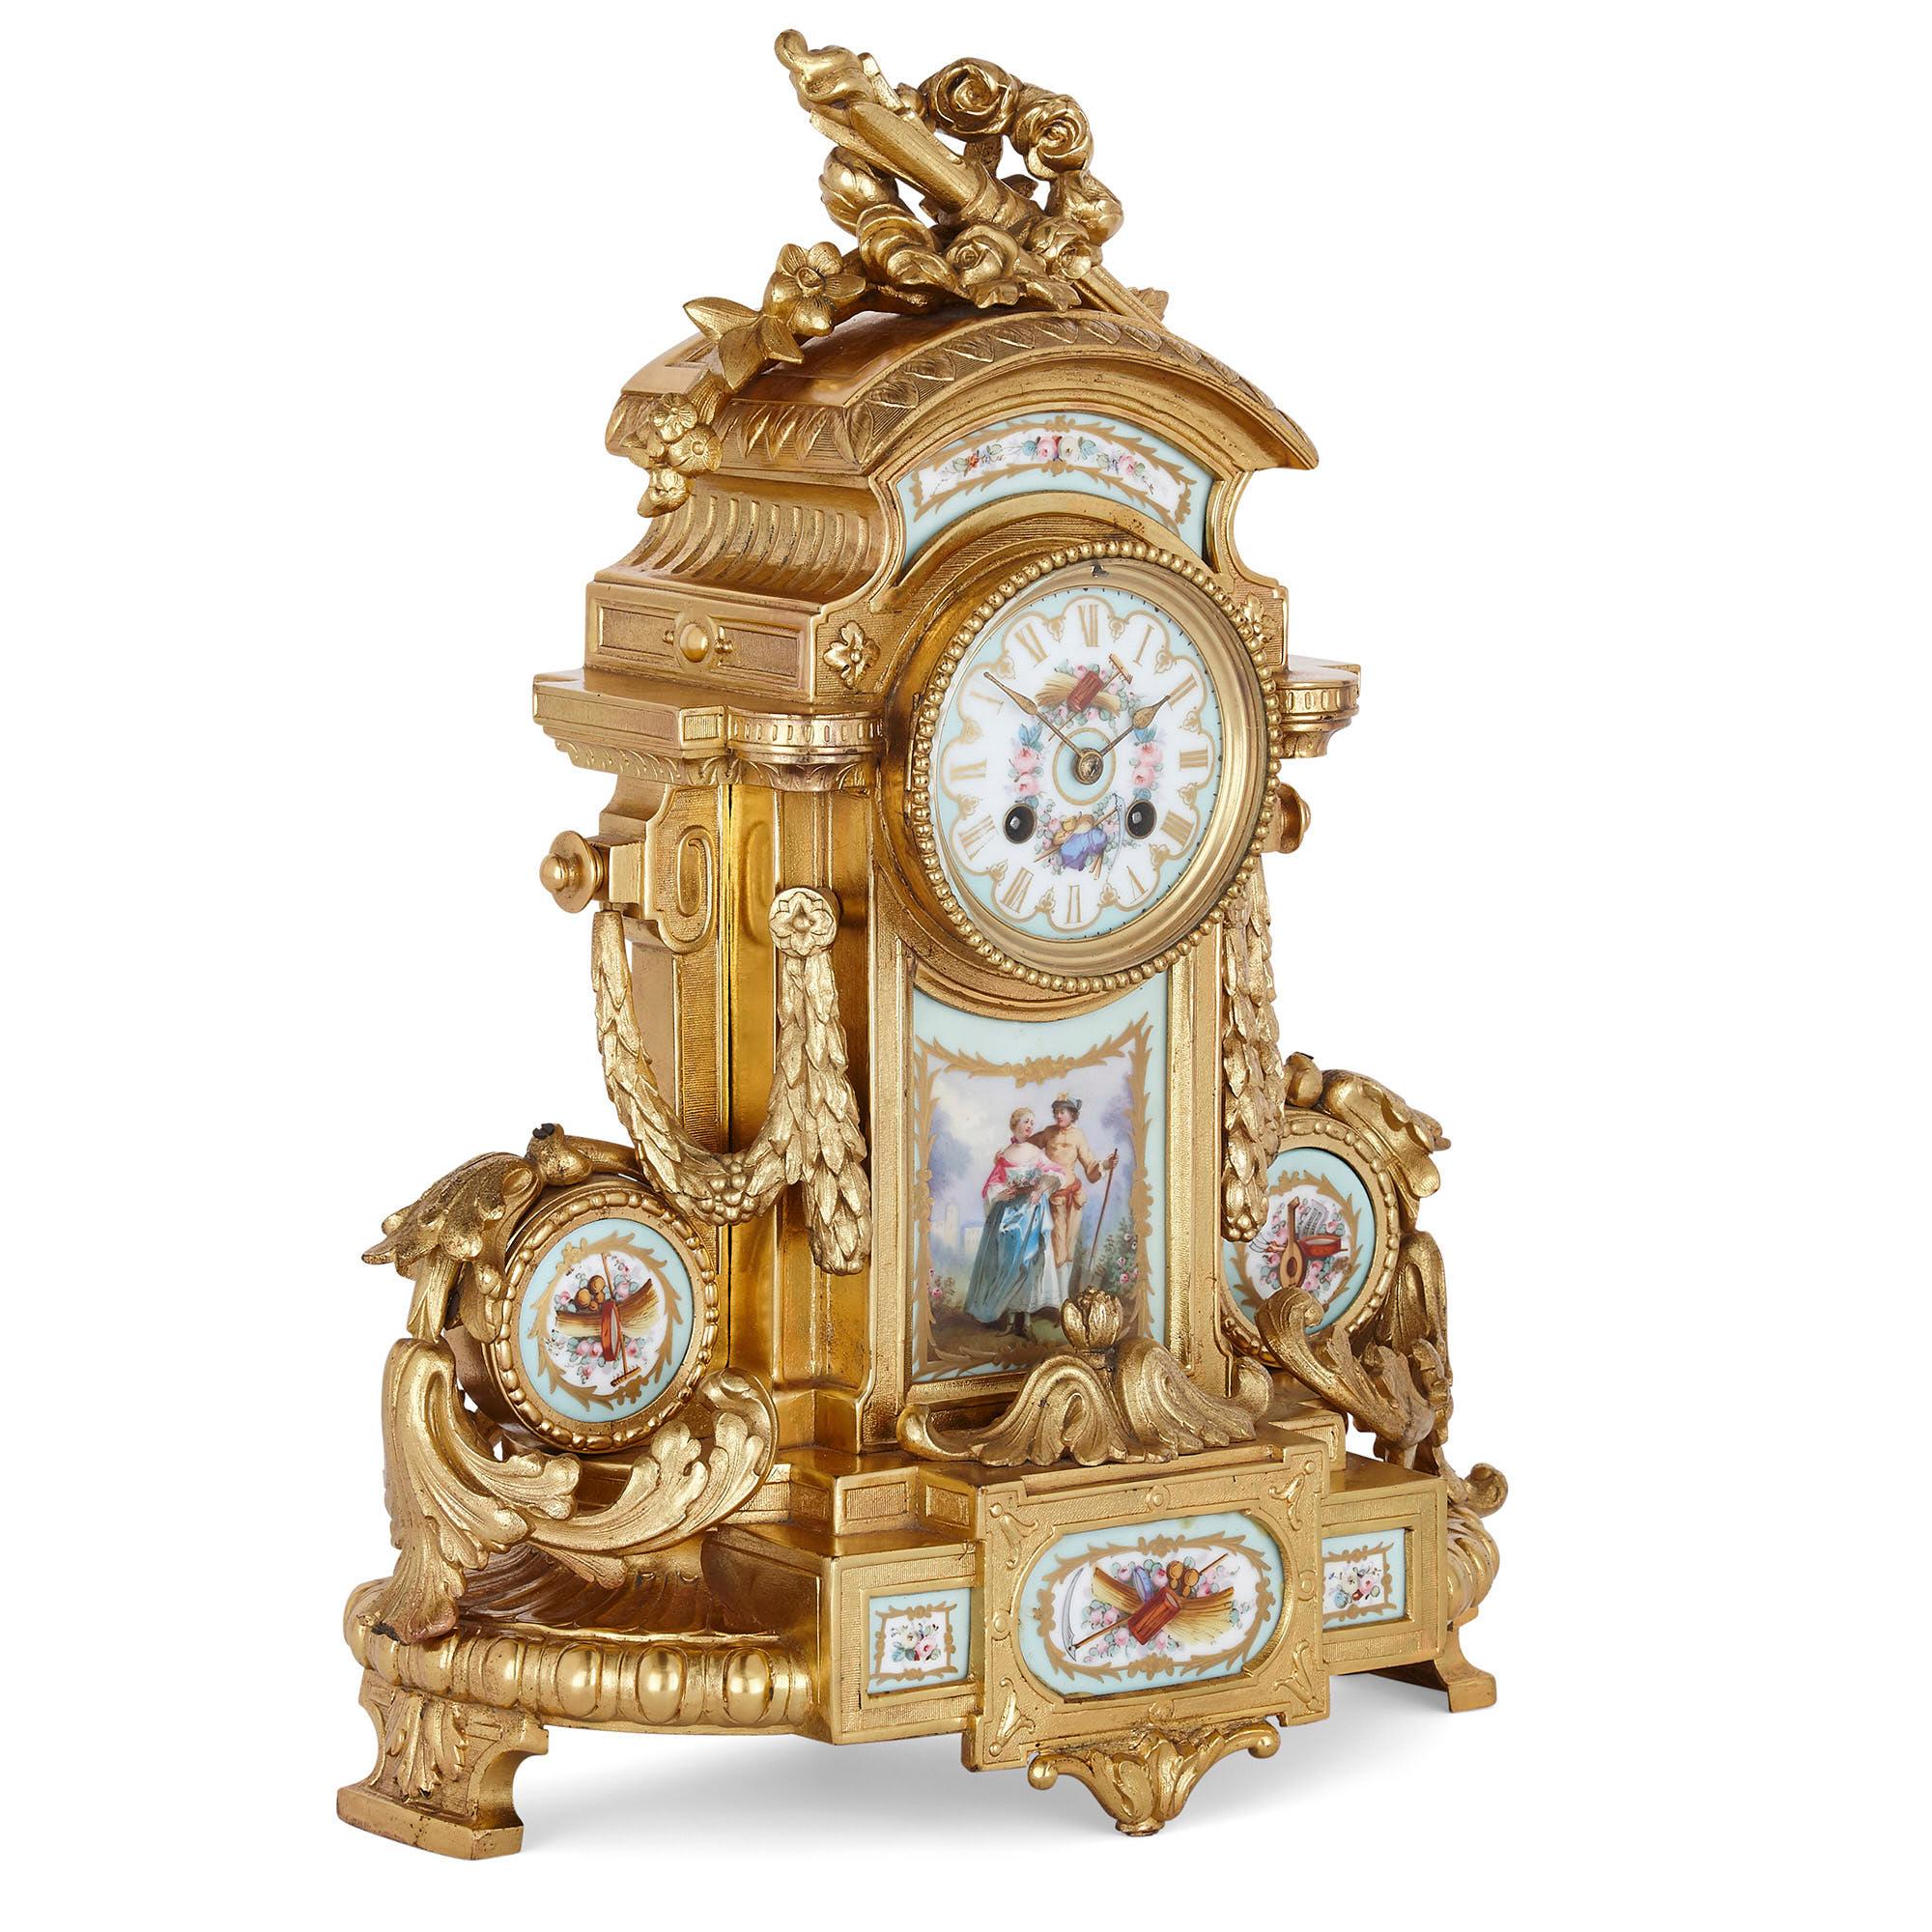 Rococo style gilt bronze mantel clock with Sèvres style porcelain plaques
French, late 19th Century
Measures: Height 45cm, width 32cm, depth 15cm

This fine mantel clock is a charming demonstration of the Rococo style. The clock features a gilt